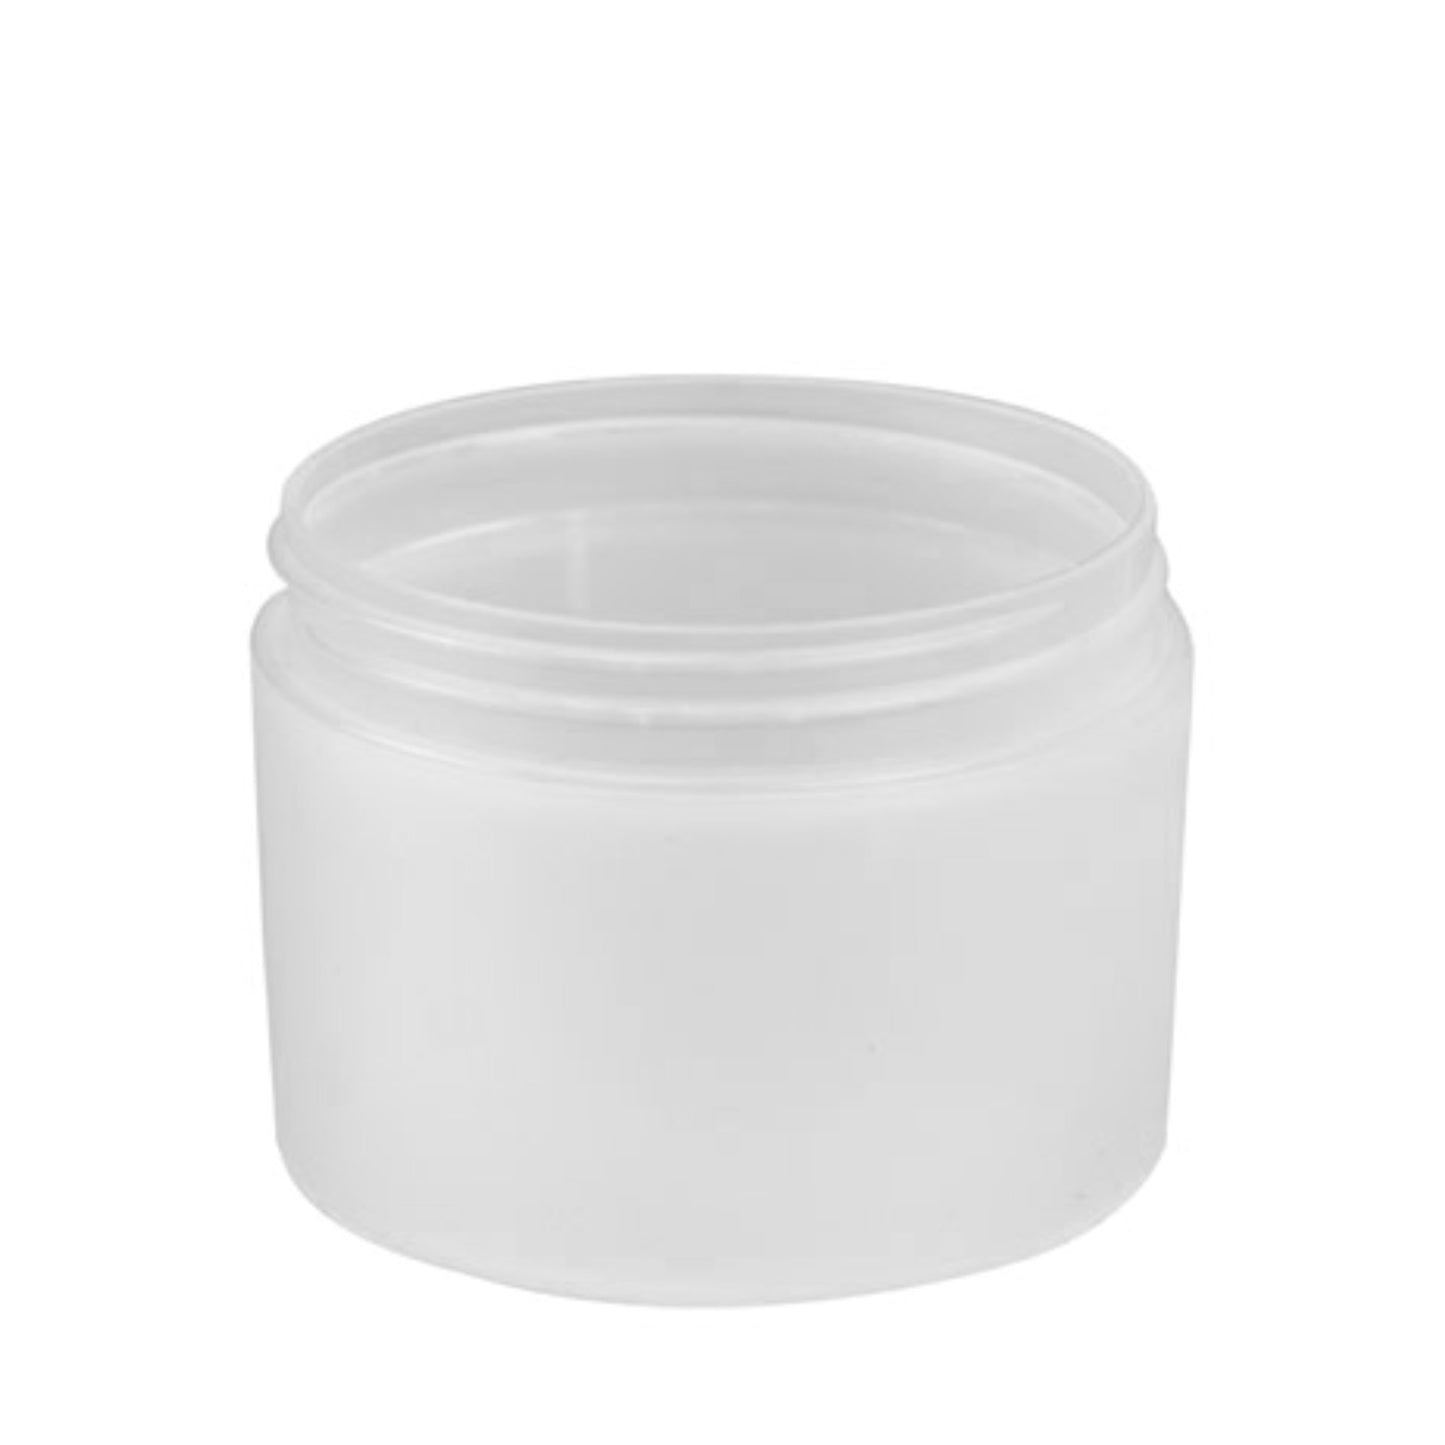 8 oz (240 ml) Frosted PP Double Wall 89-400 Jar